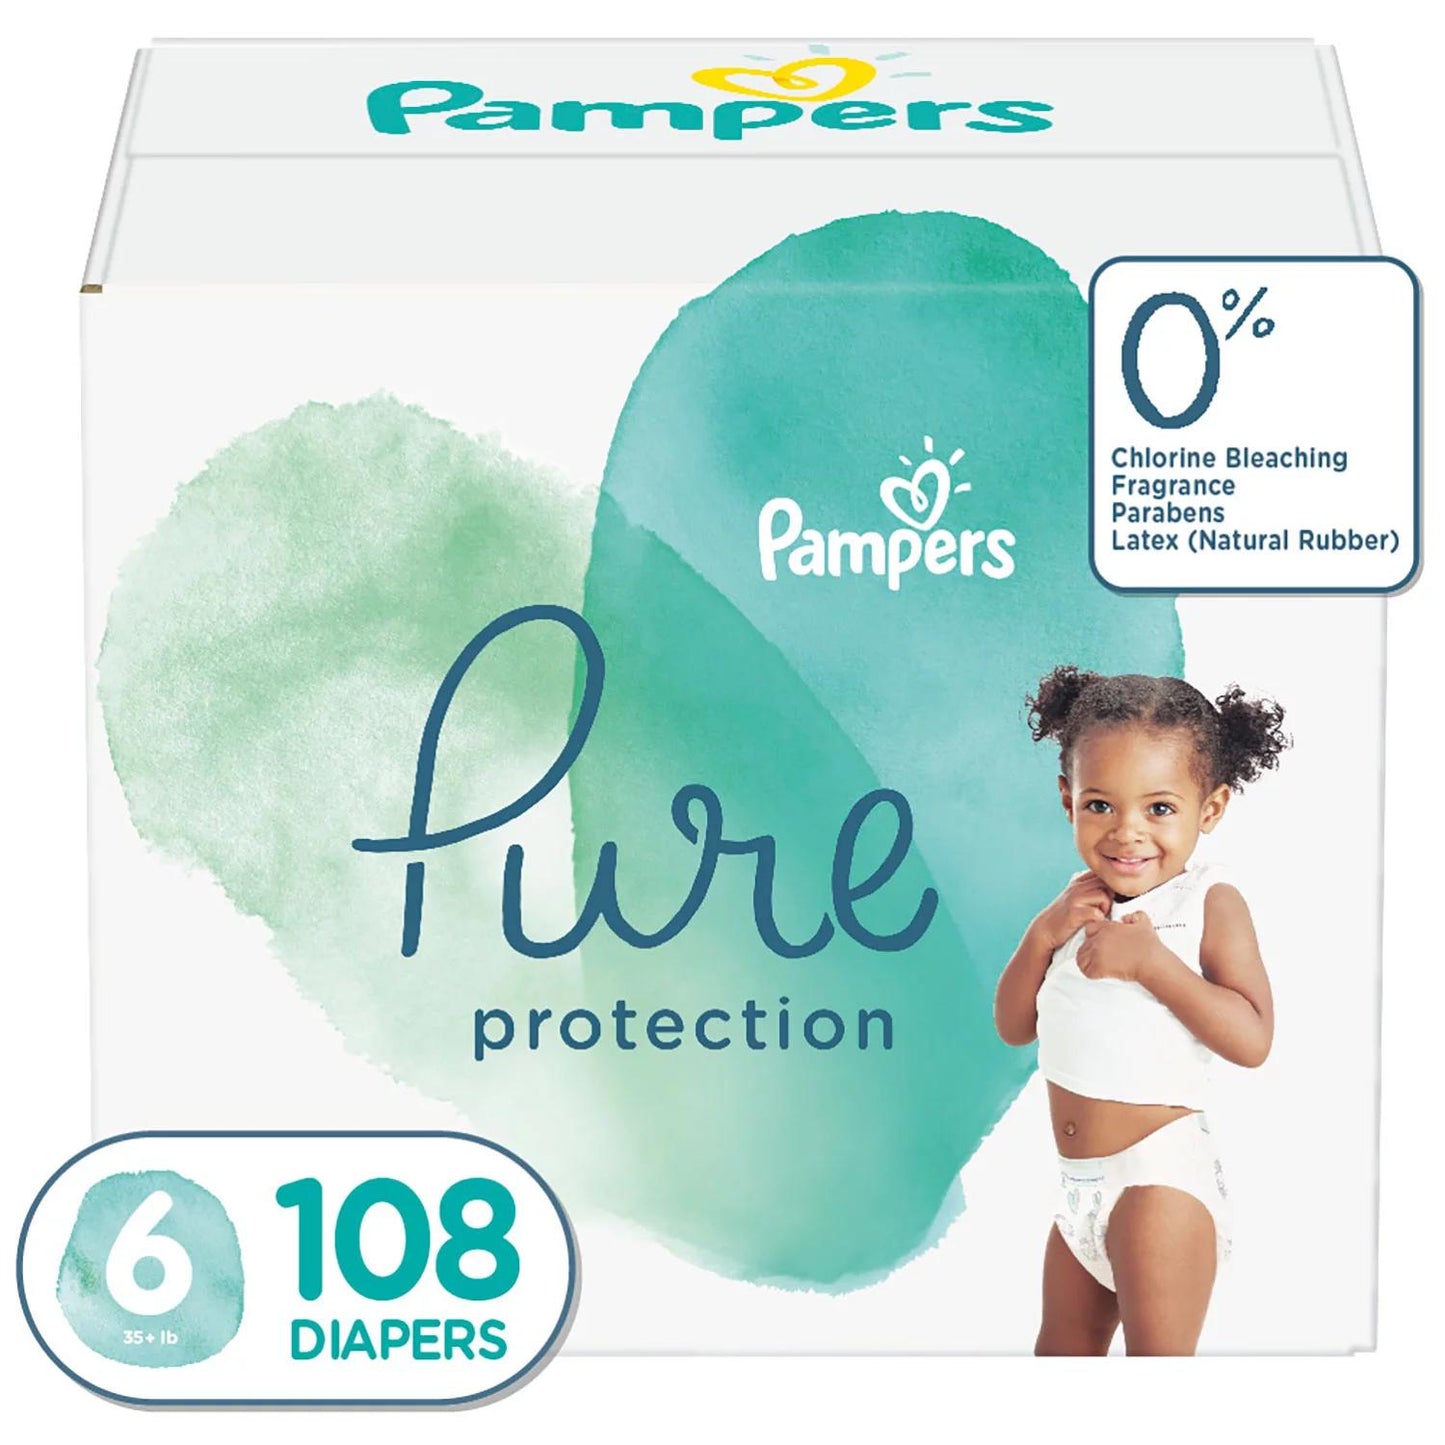 Pampers Pure Protection One-Month Supply Diapers (Sizes 1 - 6)